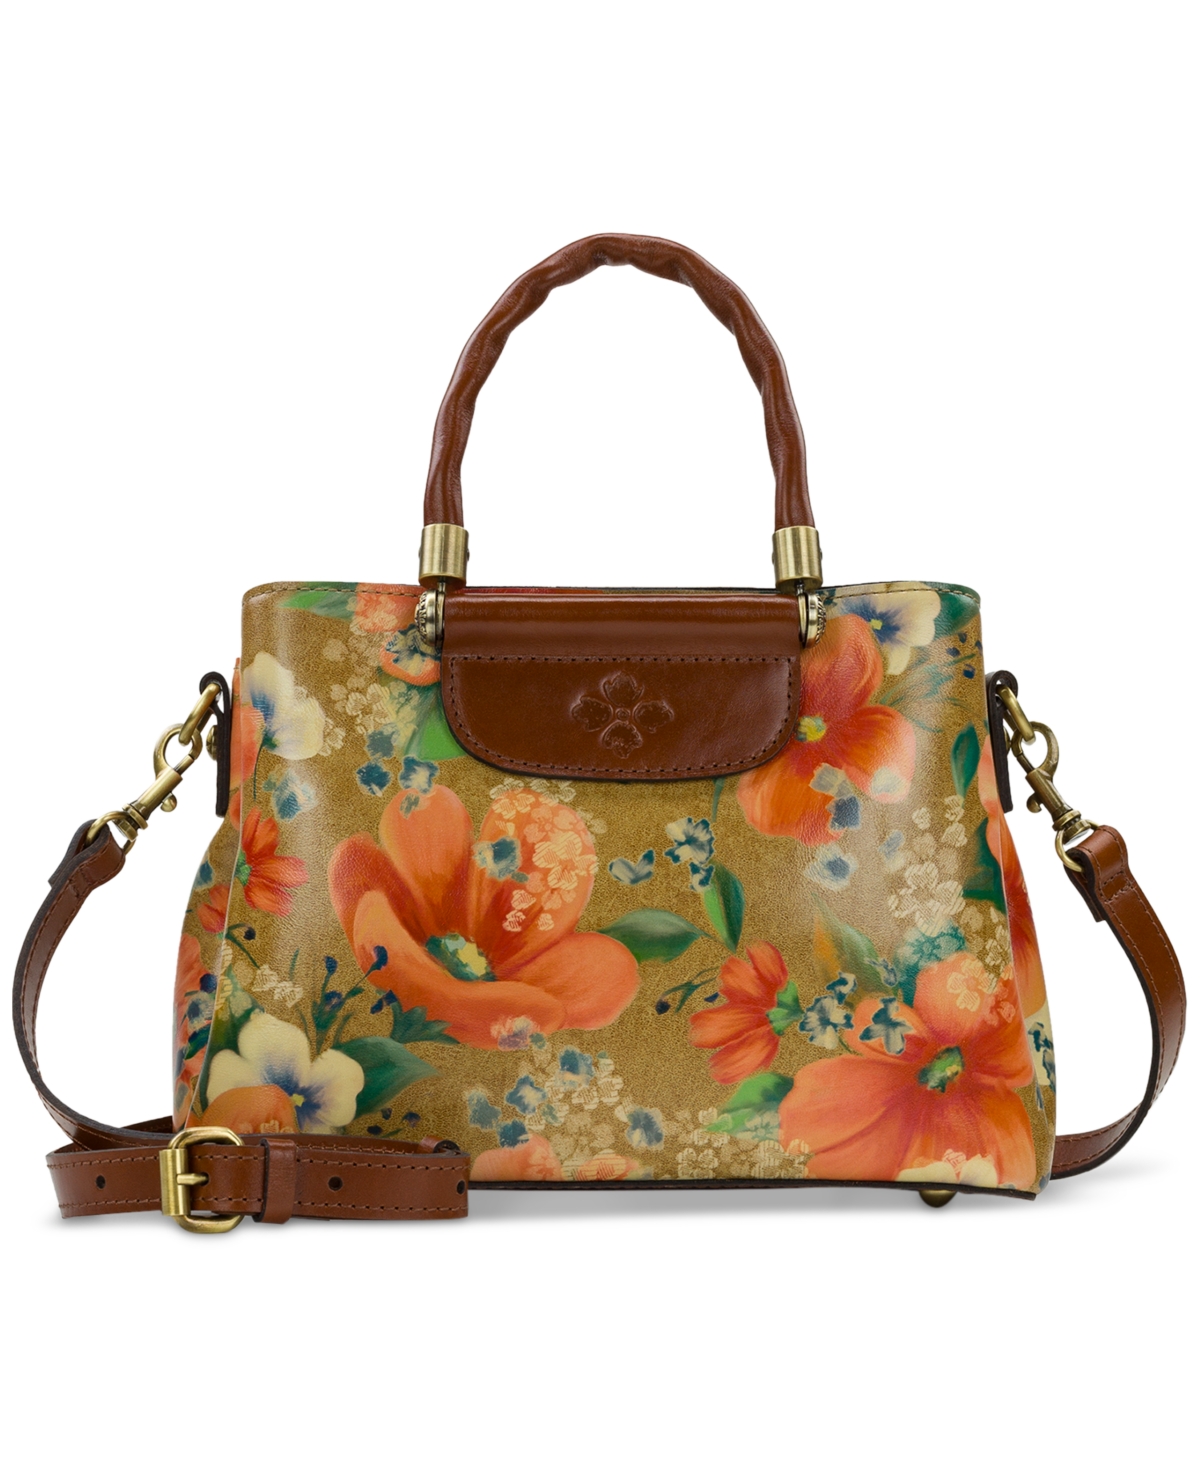 Patricia Nash Marielle Small Leather Top Handle Crossbody In Apricot Blossoms